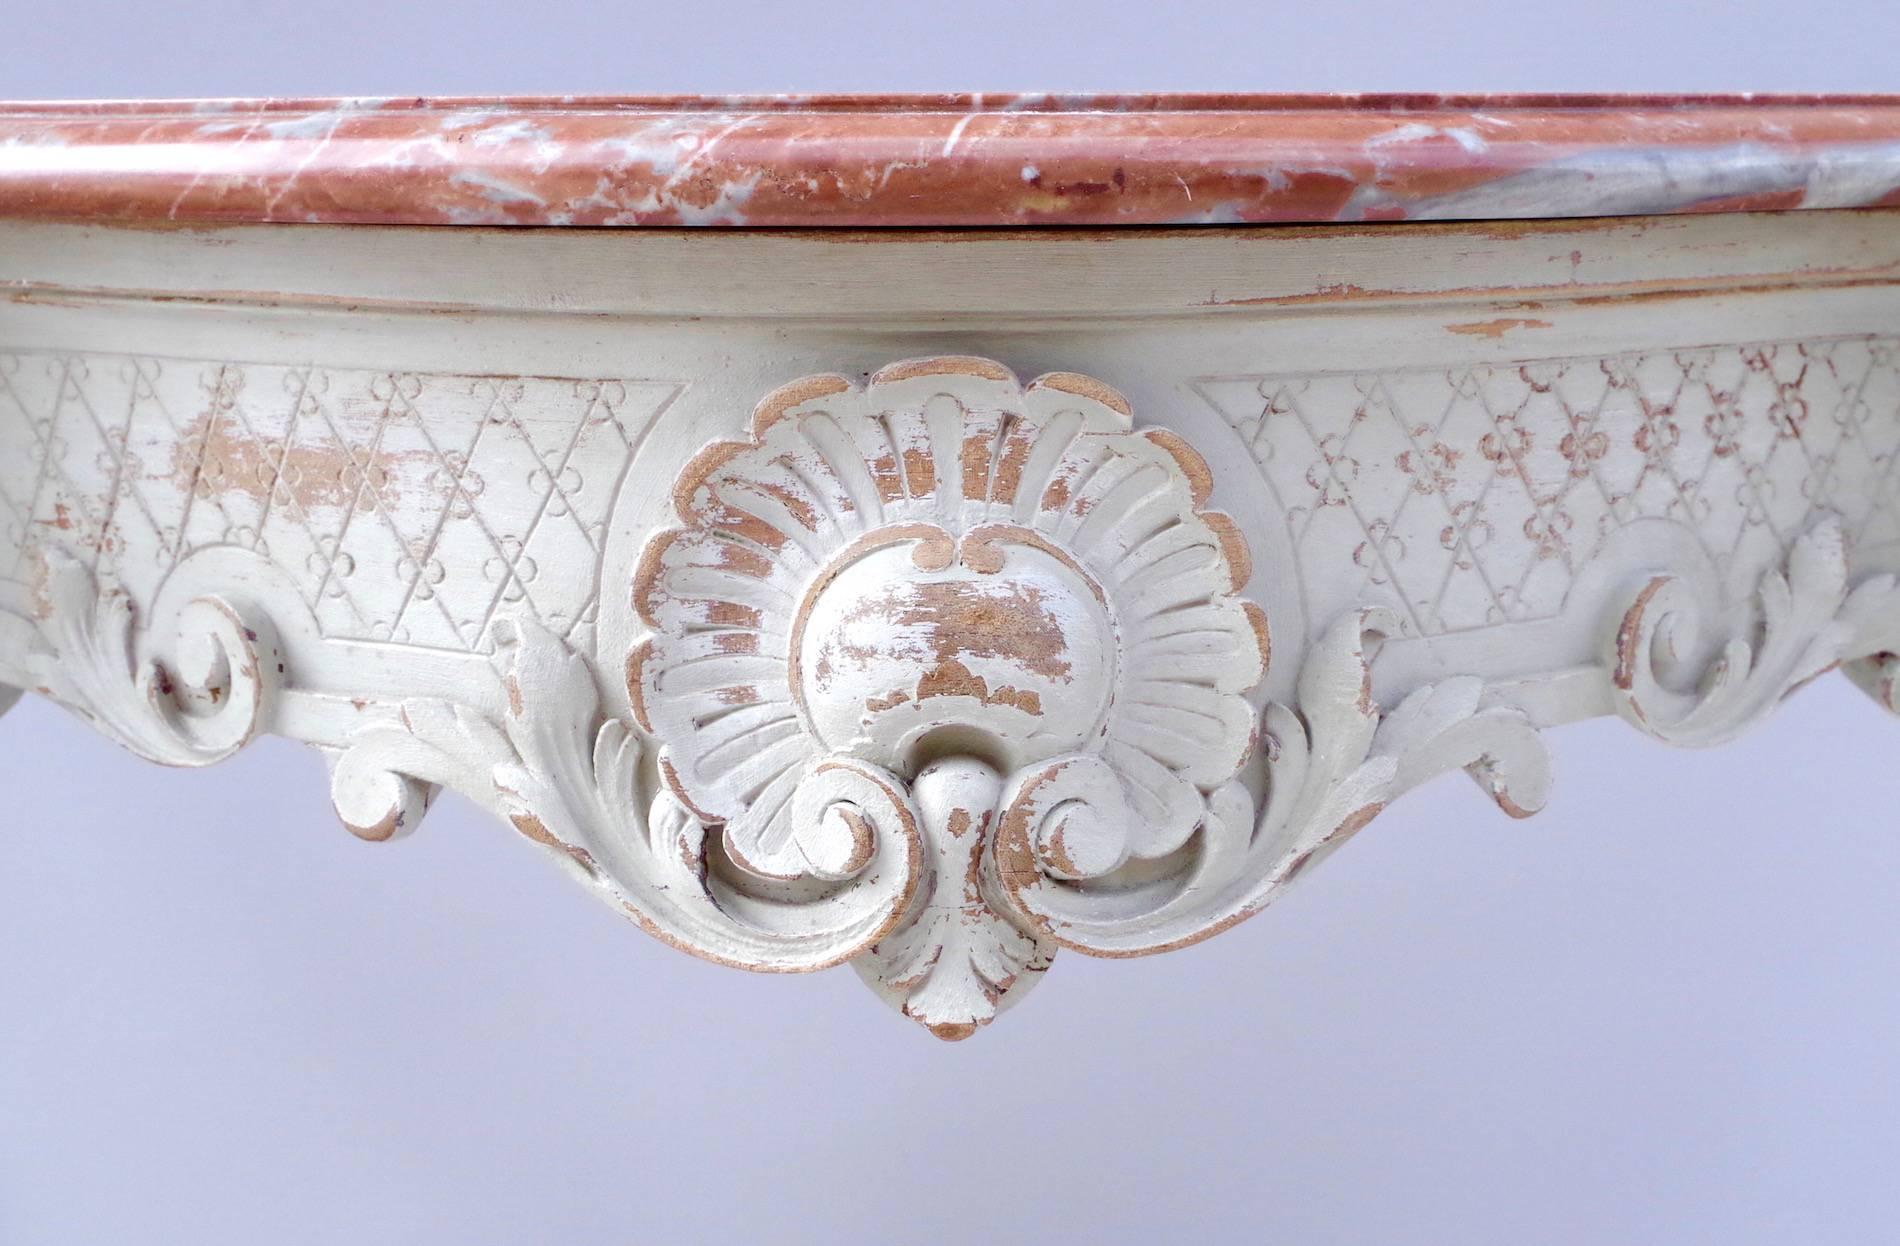 Small Louis XV style console in light grey. The apron is decorated with finely sculpted acanthus leaves and shells on a crisscross pattern background. The four curved legs are joined with a richly sculpted stretcher decorated with an openwork shell